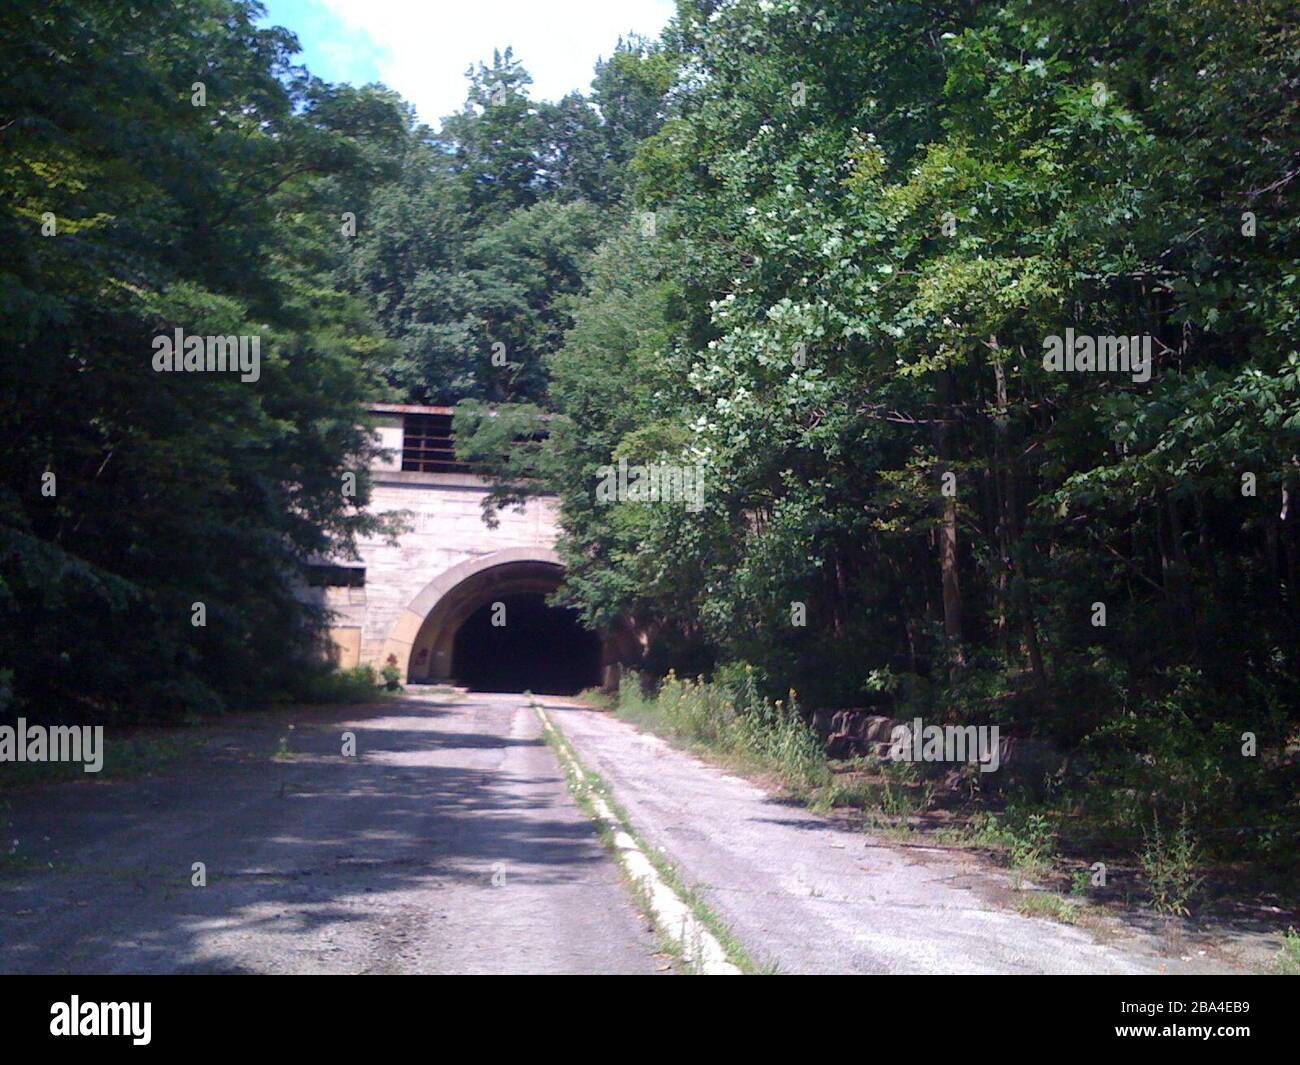 'Took image myself on 08/03/2009. Also took 2006 image of Sideling Hill Tunnel.; 18 February 2012 21:49:47(UTC) (Originally uploaded at 2009-08-05 17:05:39); Originally uploaded on en.wikipedia; Originally uploaded by Jgera5 (Transferred by xnatedawgx); ' Stock Photo